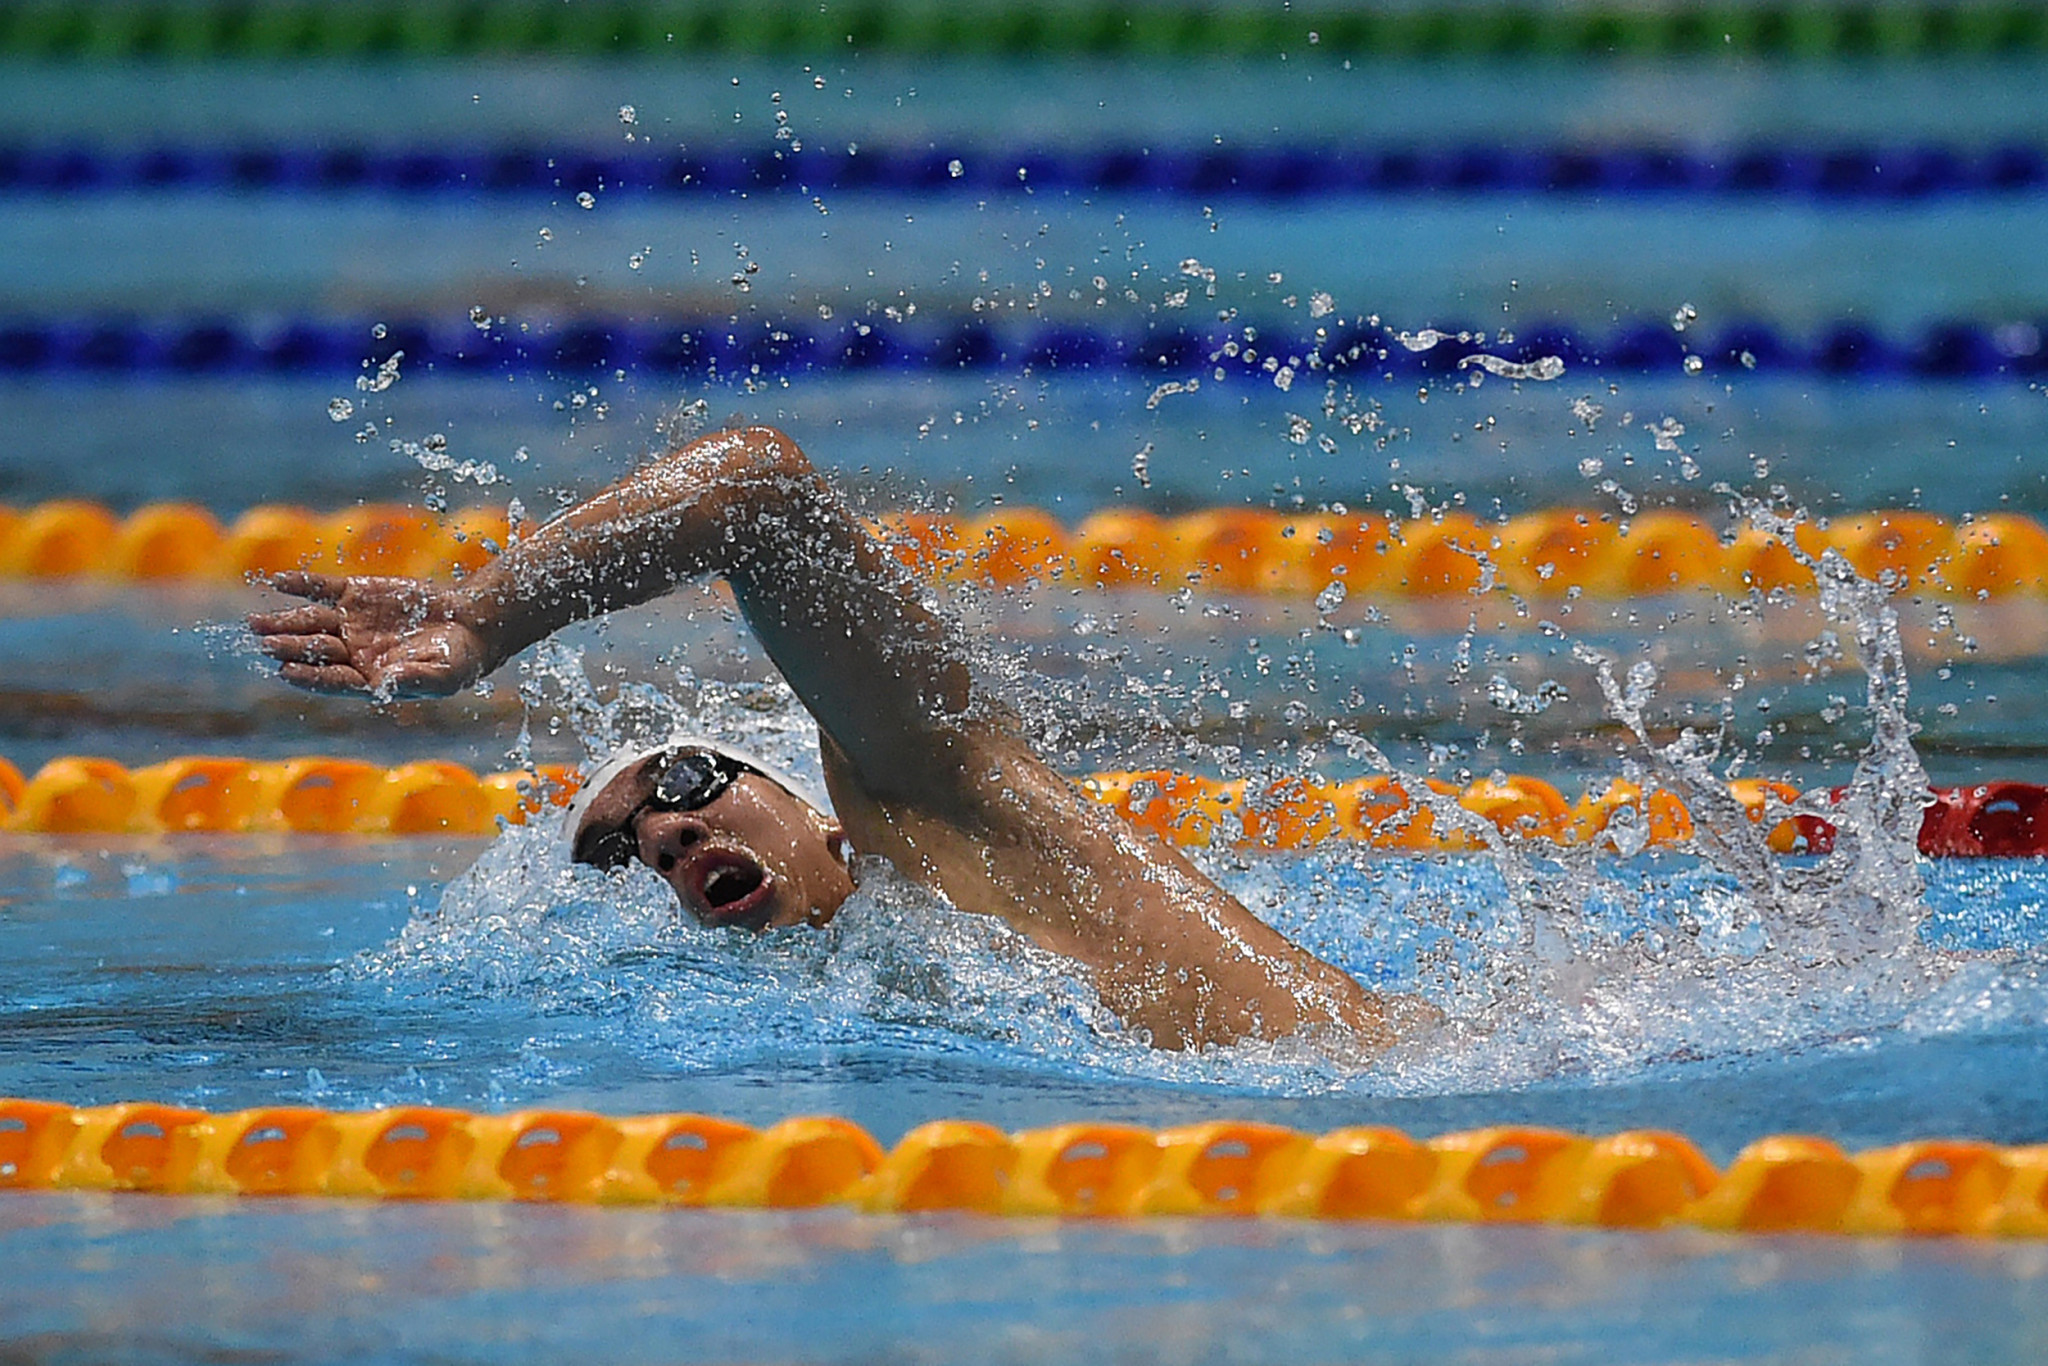 Huy Hoàng was part of the Vietnamese swimming team which won gold in the men's 4x200 freestyle event ©Getty Images